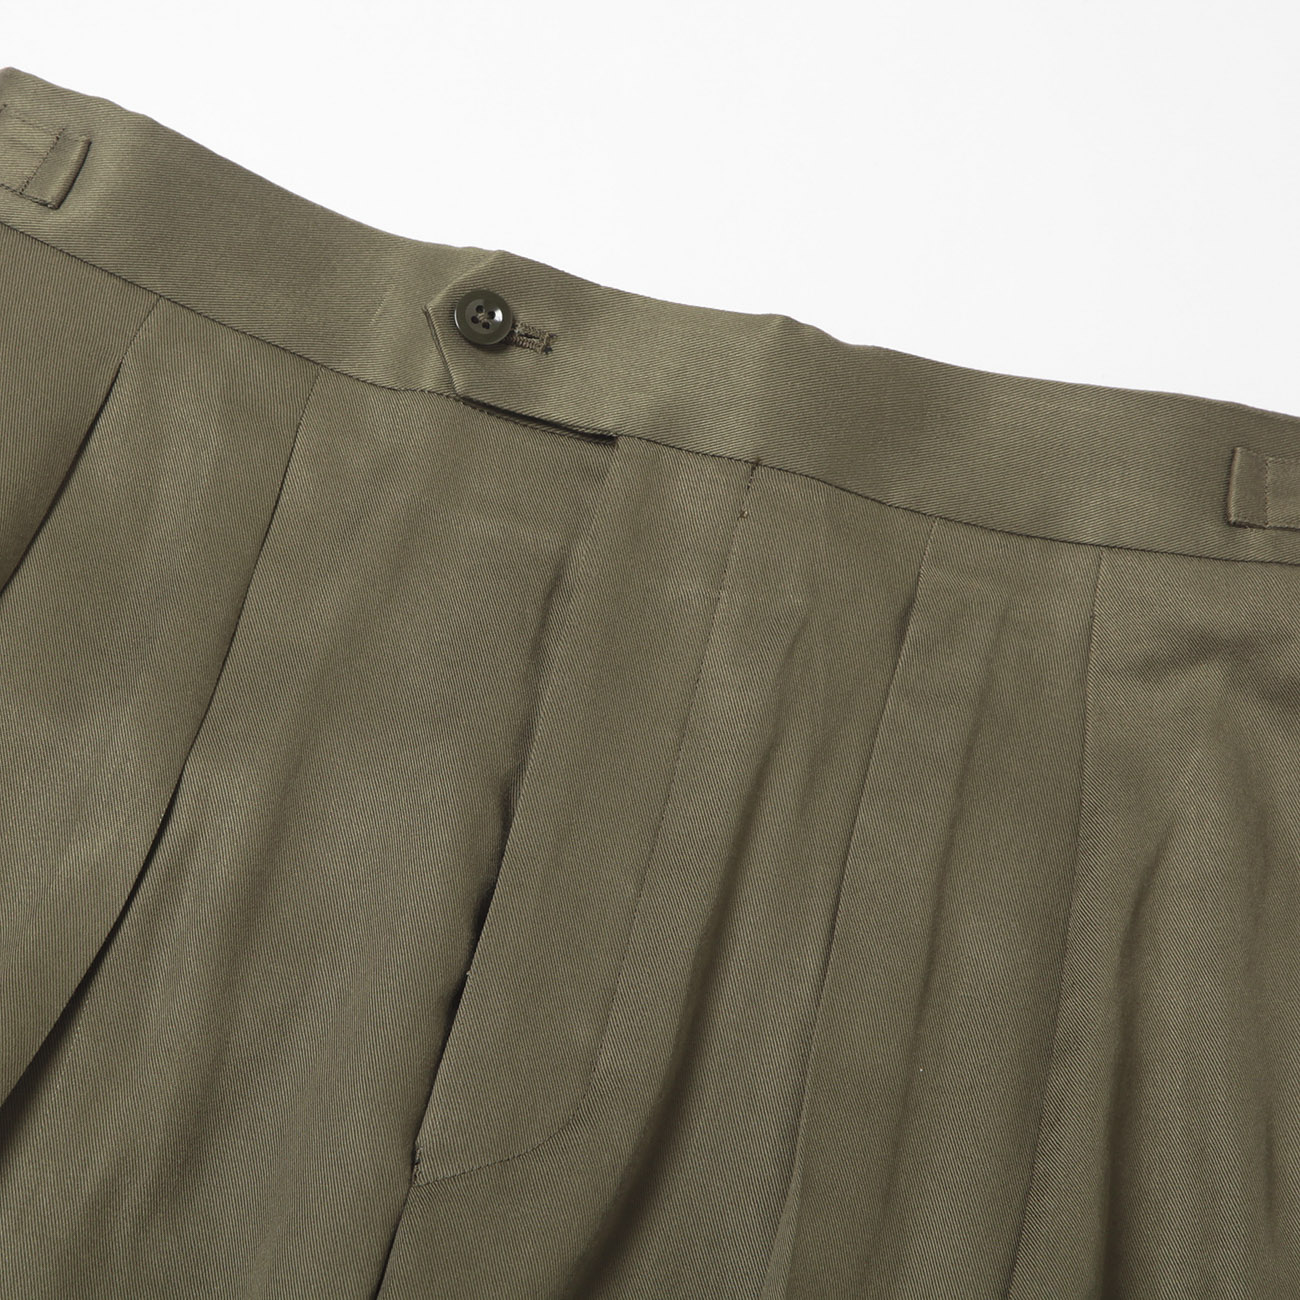 NEAT / ニート   LYOCELL CHINO / Wide Type II   Olive   通販   正規